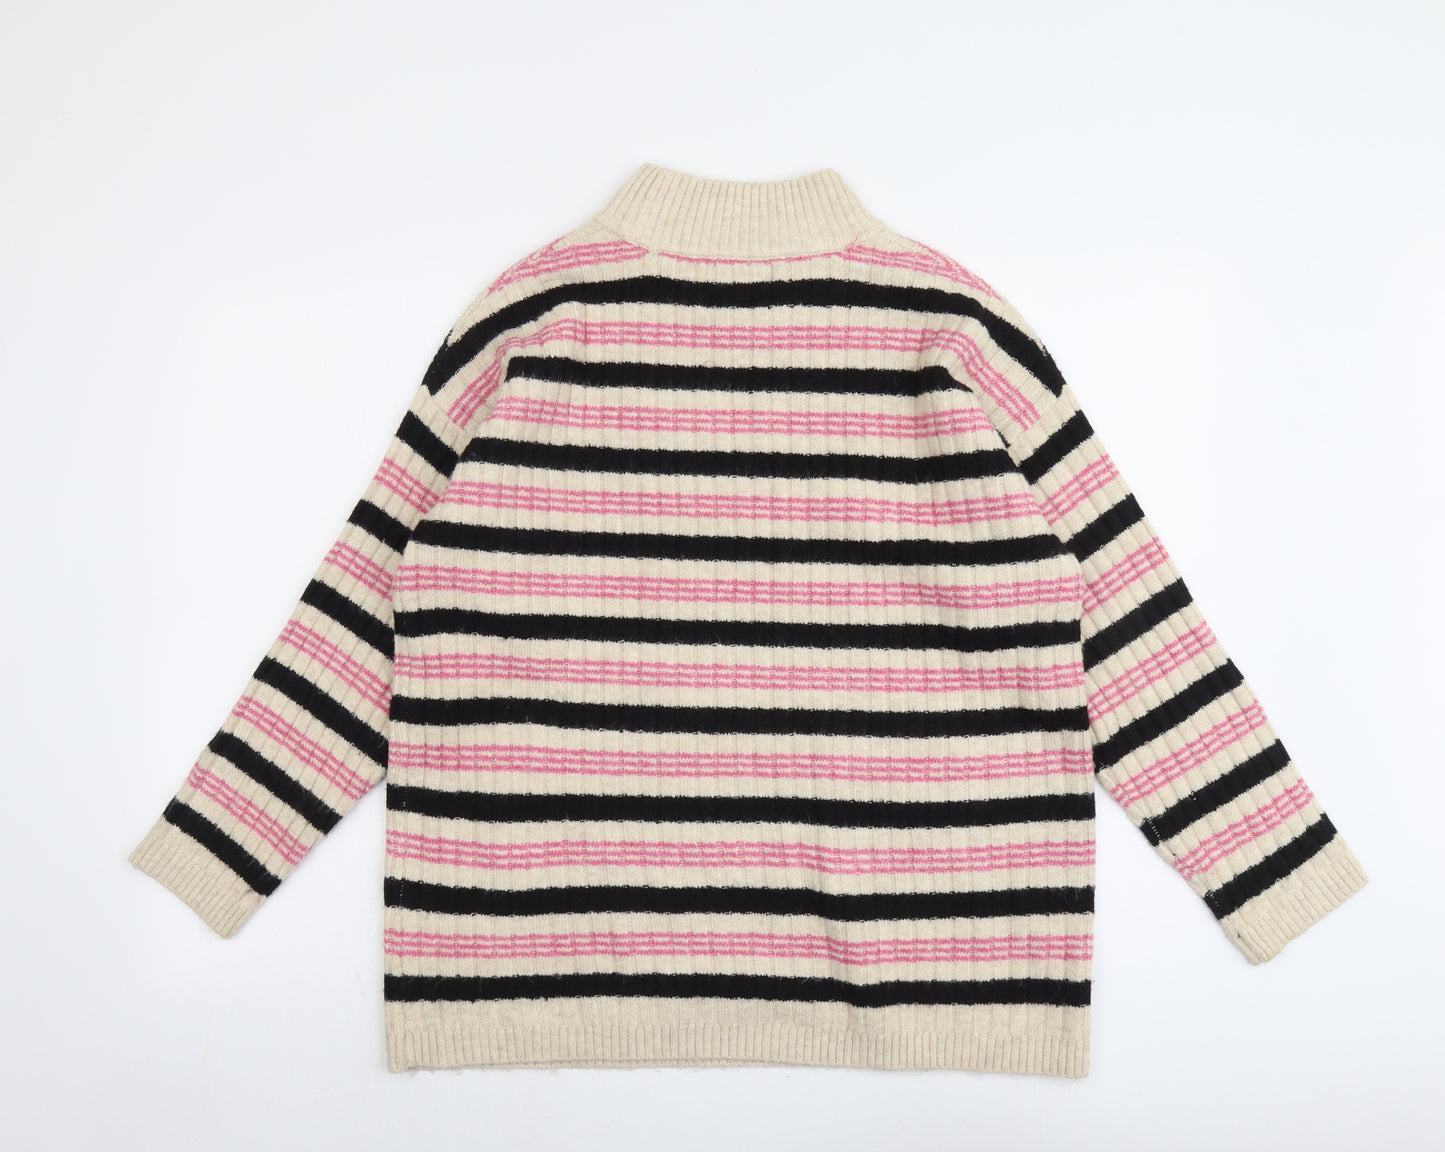 Marks and Spencer Womens Multicoloured Mock Neck Striped Acrylic Pullover Jumper Size L